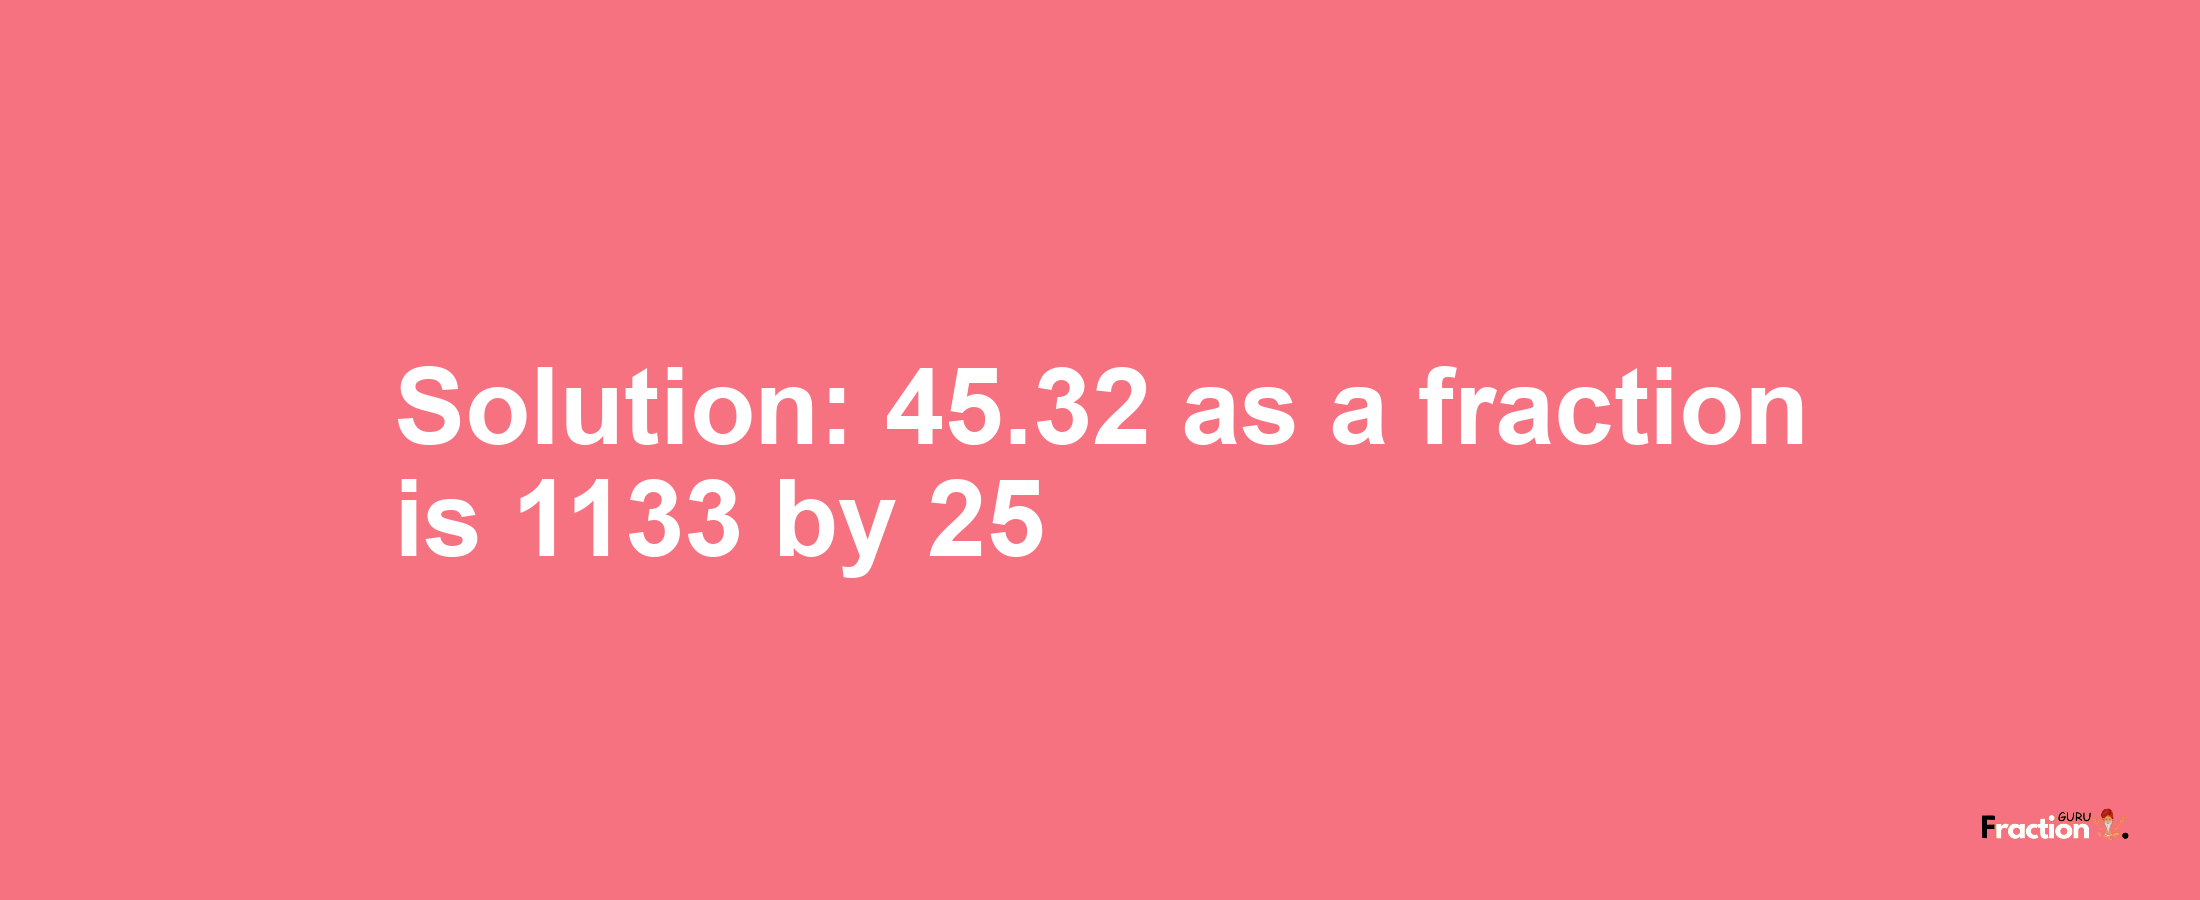 Solution:45.32 as a fraction is 1133/25